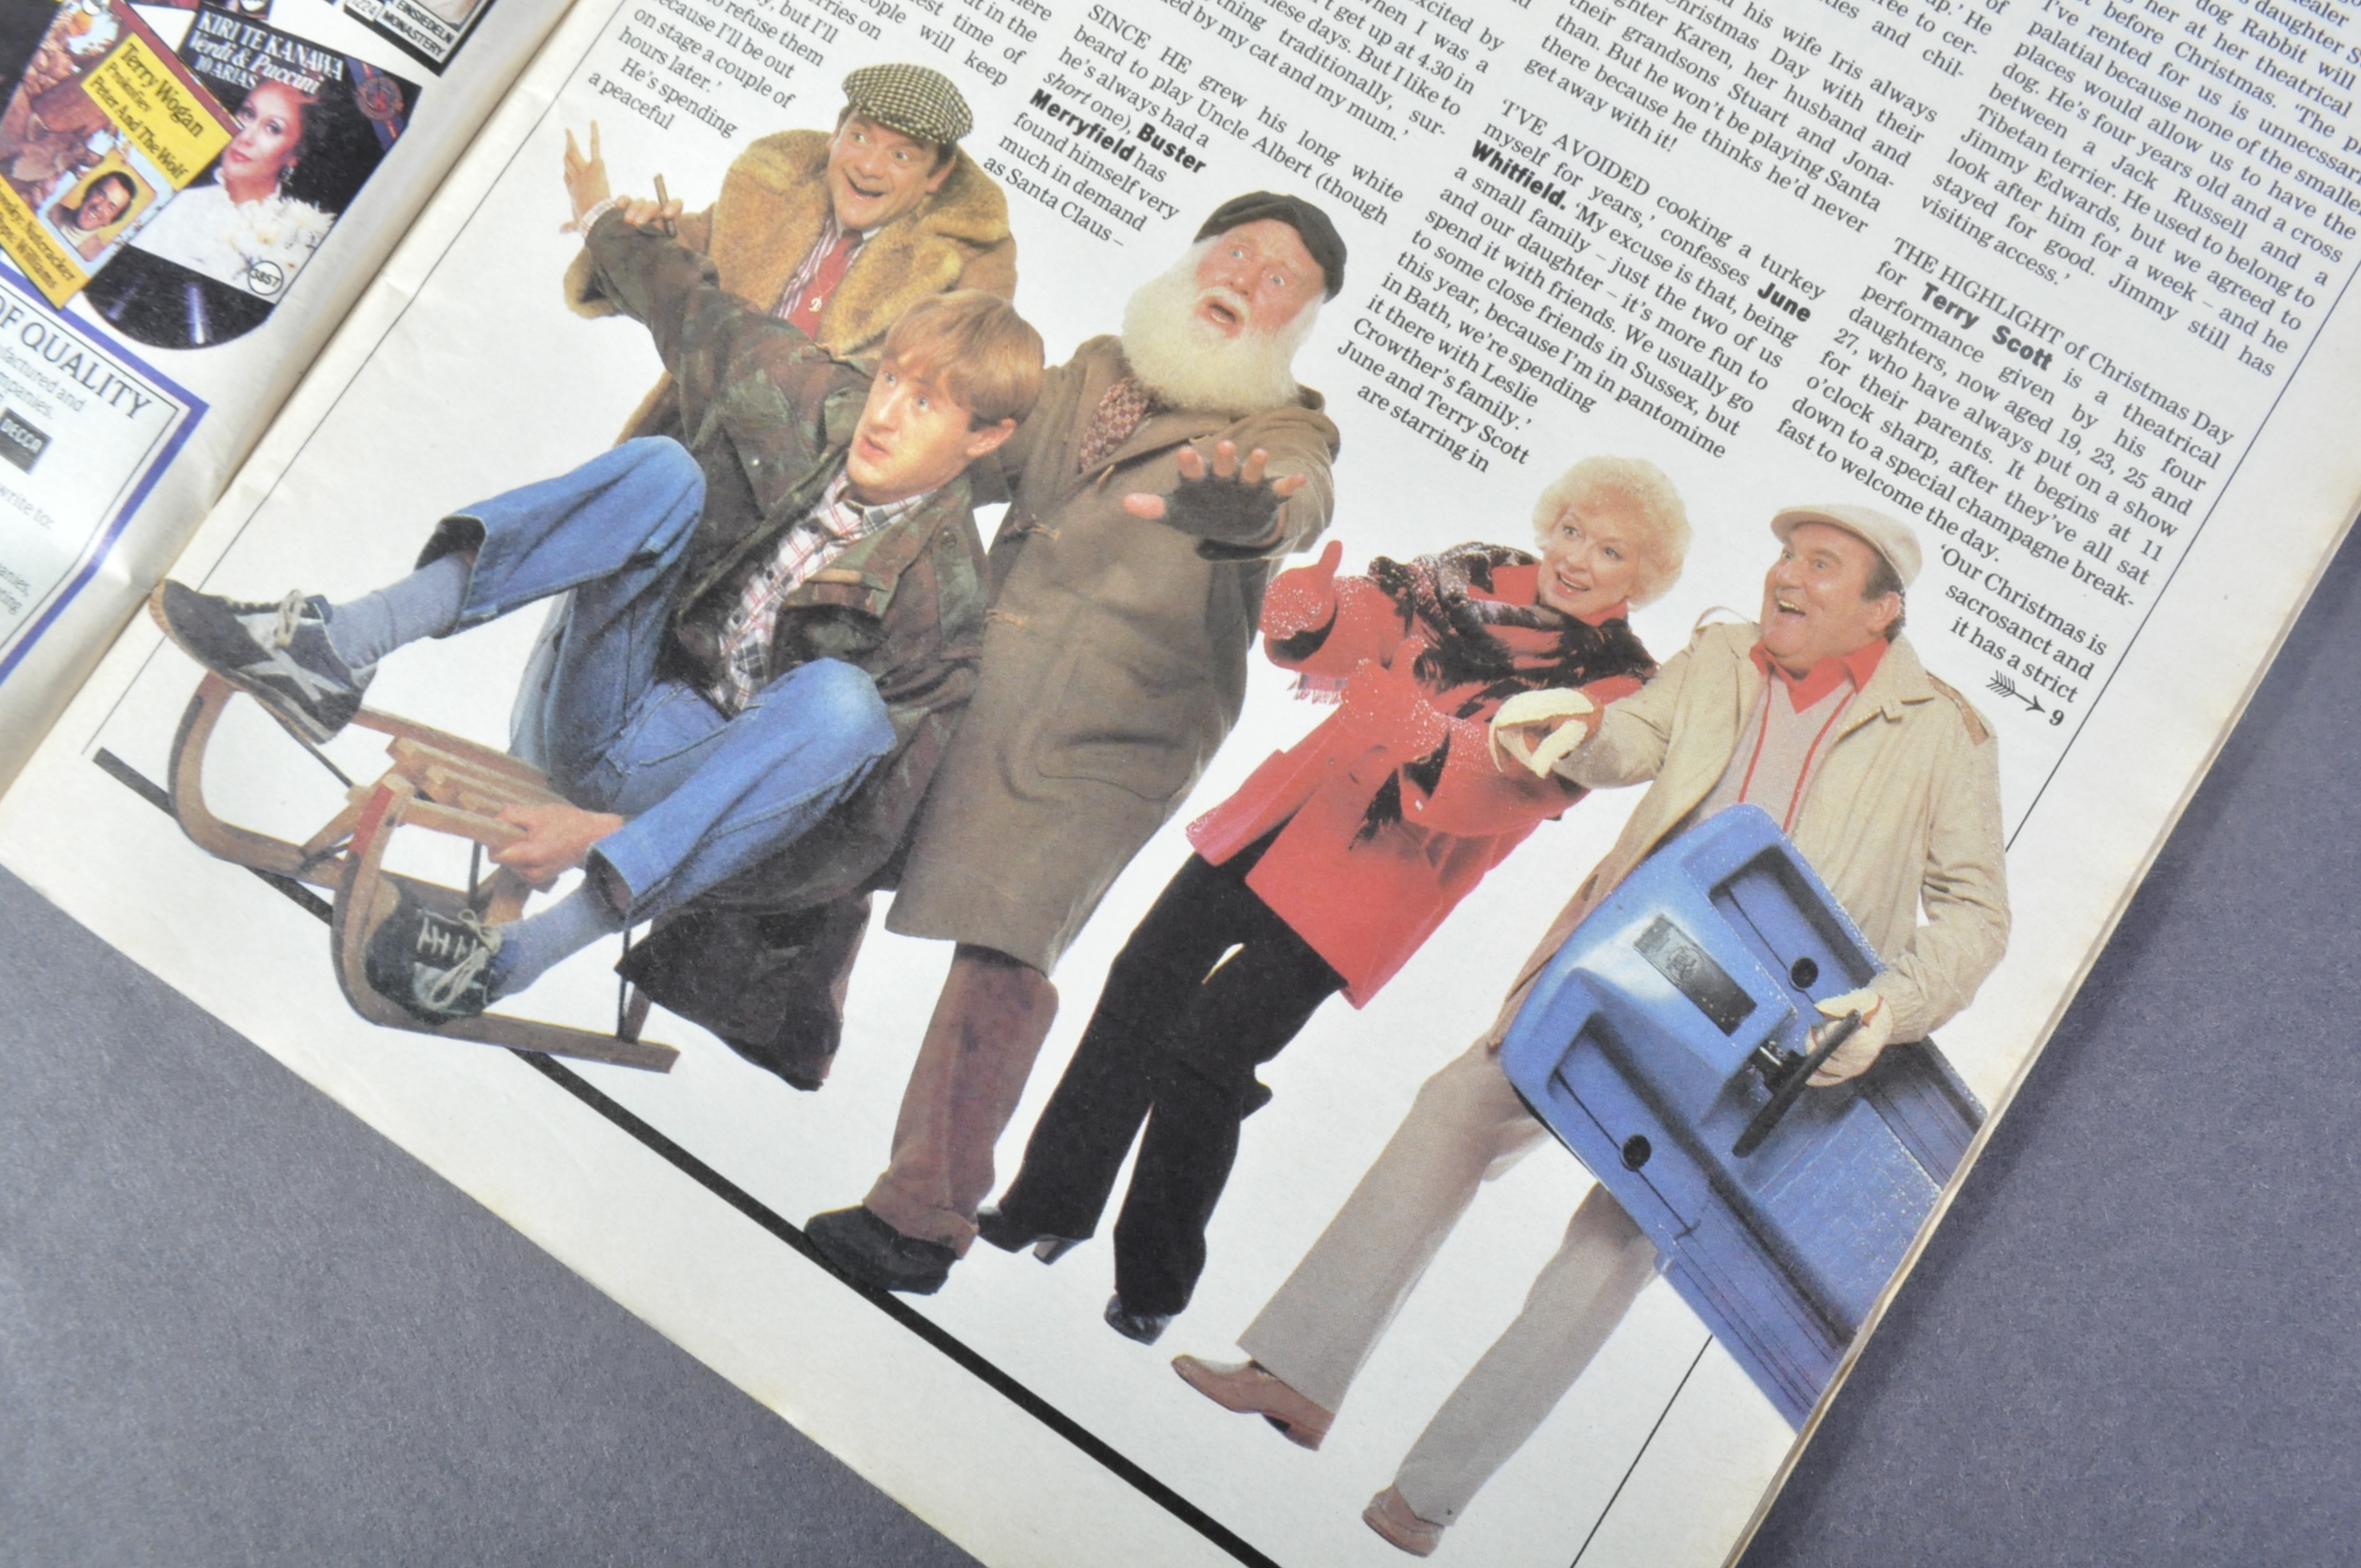 ONLY FOOLS & HORSES - RADIO TIMES - ORIGINAL VINTAGE 1985 ISSUE - Image 2 of 3